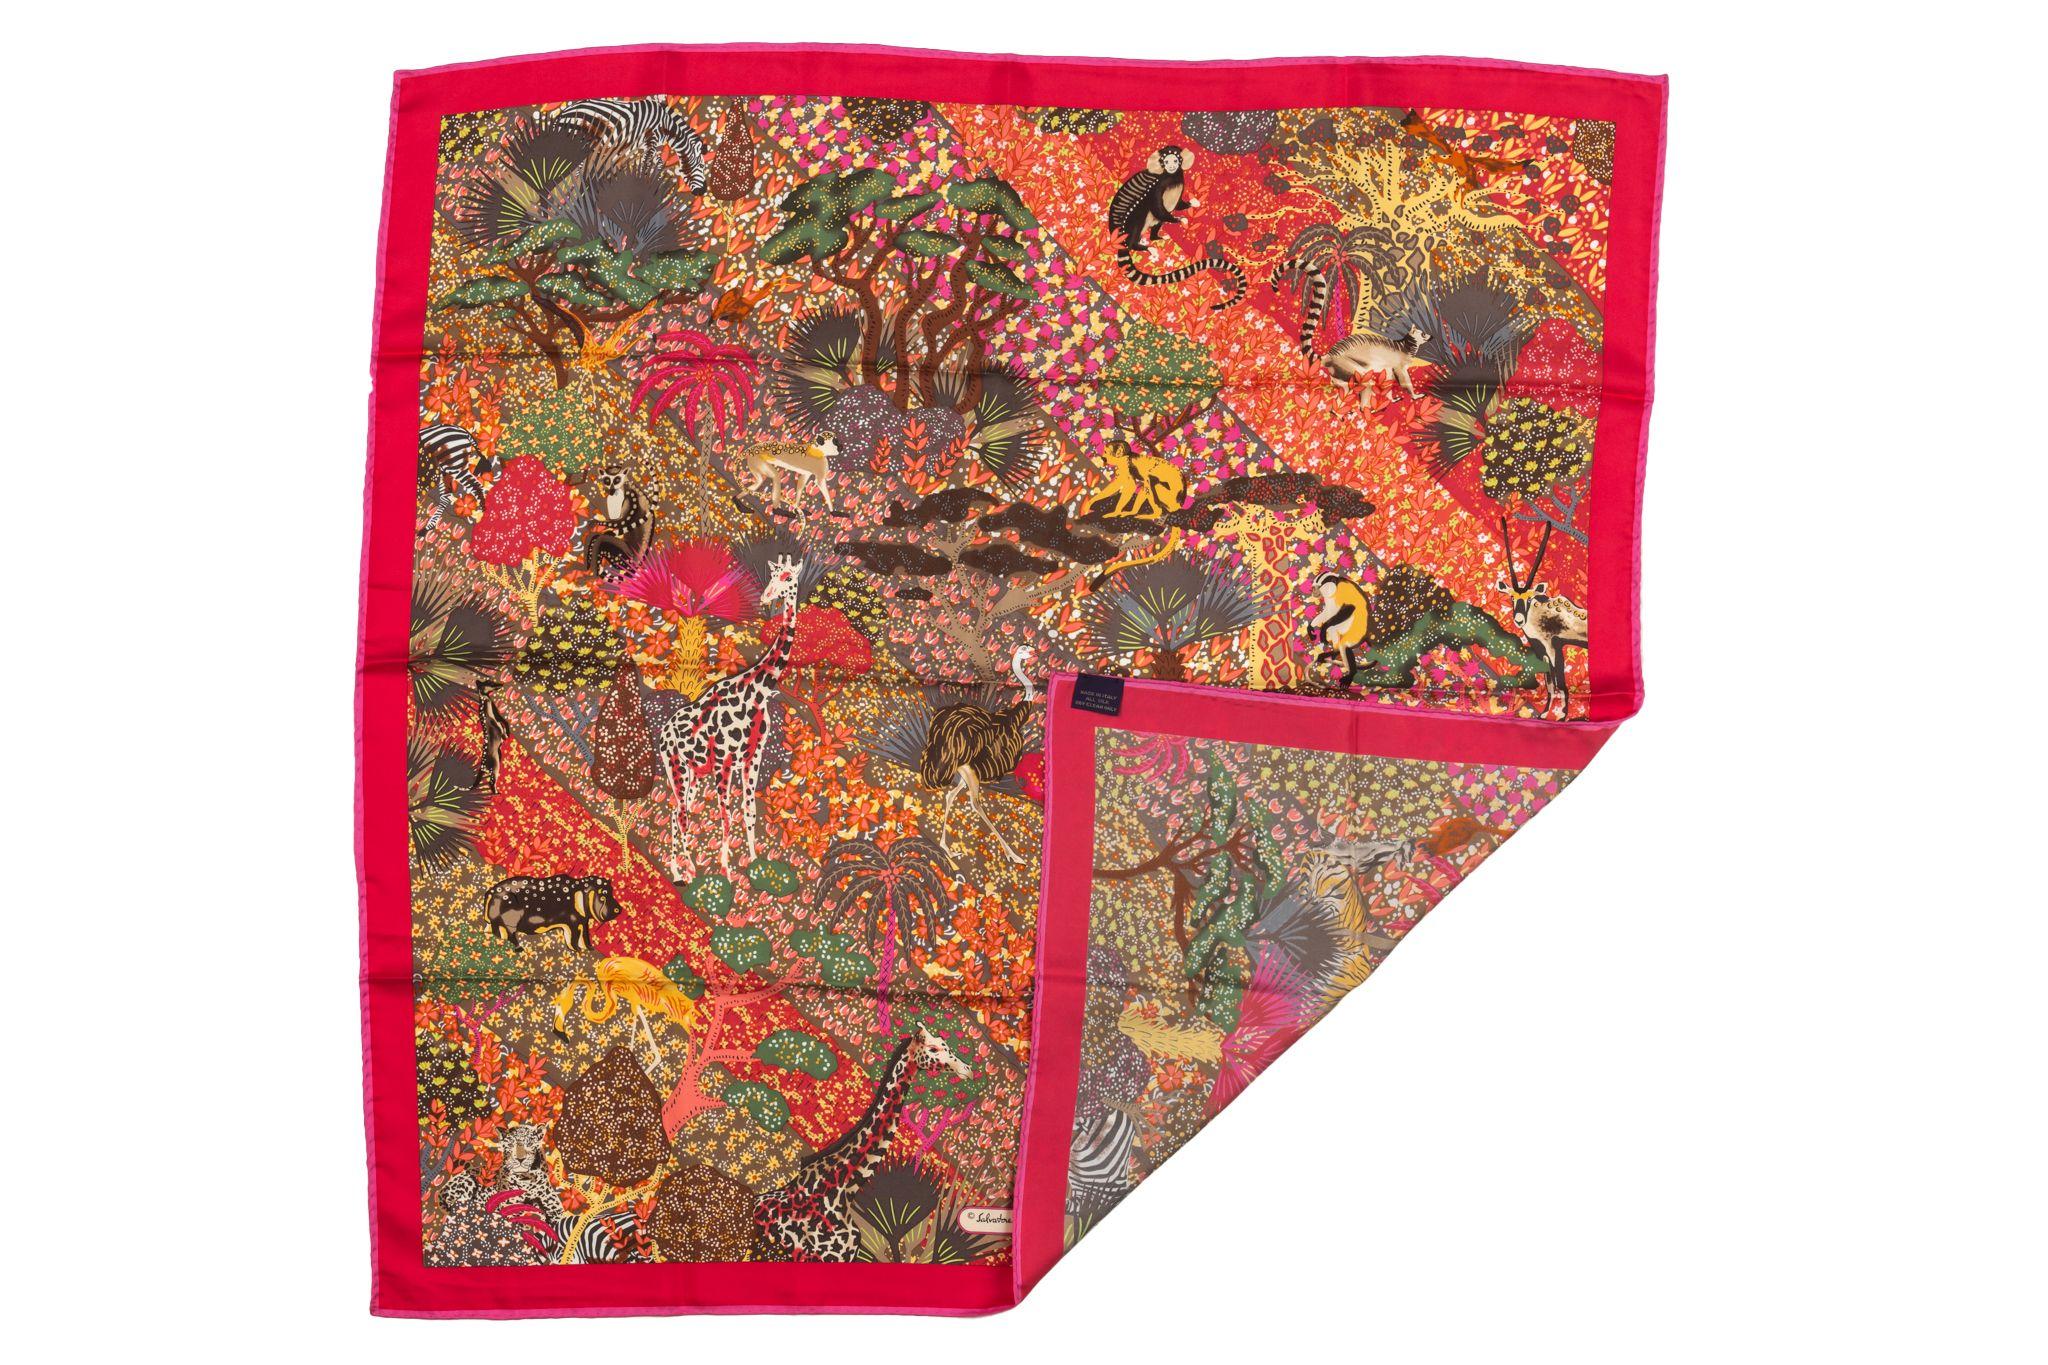 Salvatore Ferragamo Vintage Silk Scarf in orange with a red frame. Item is in new condition.